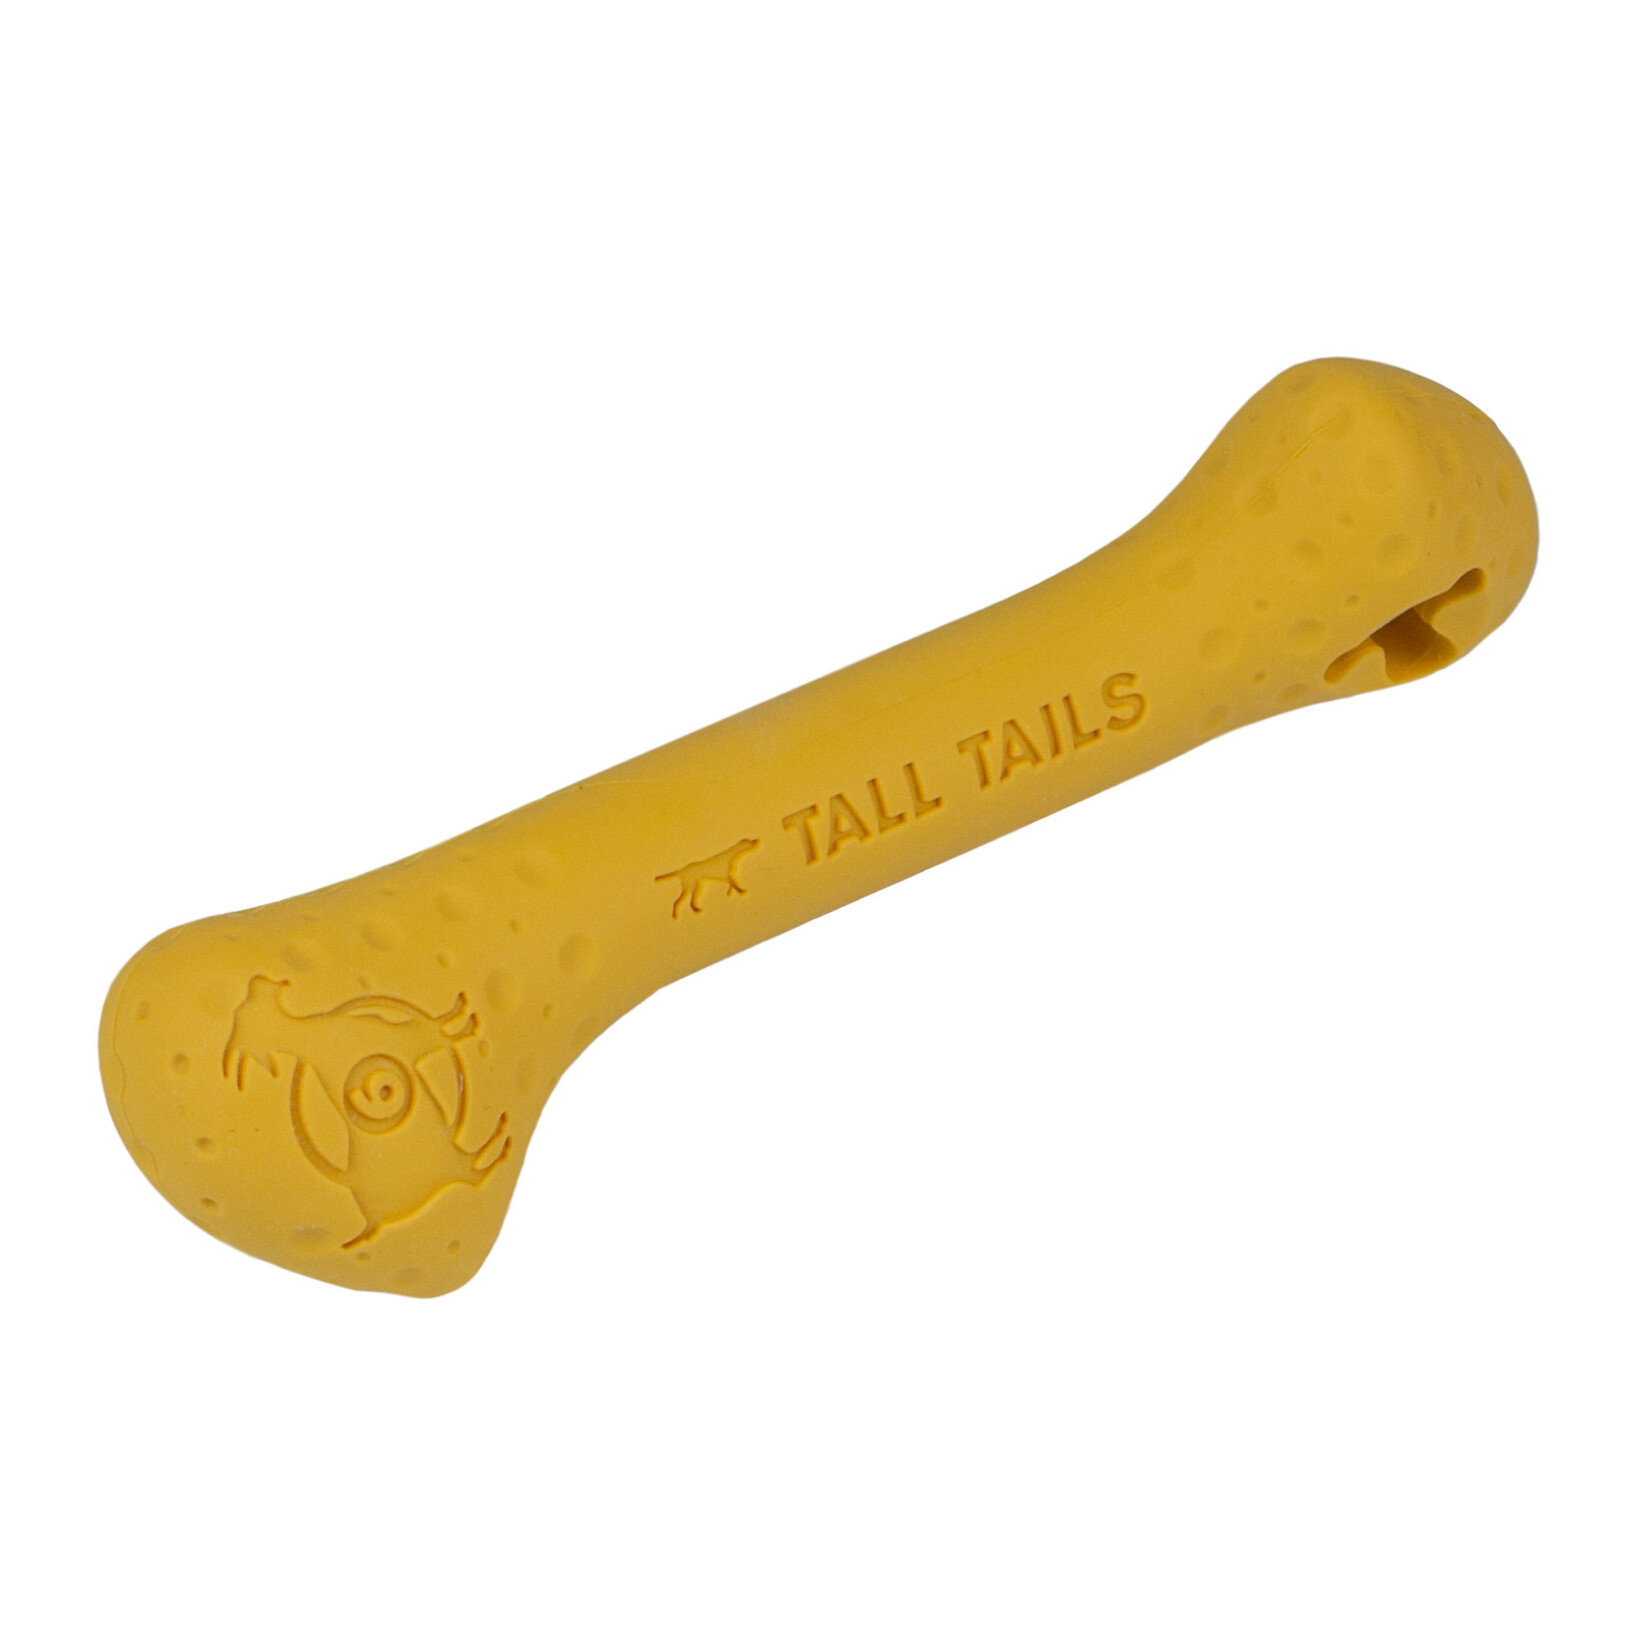 Tall Tails Tall Tails Natural Rubber GOAT Sport Bone